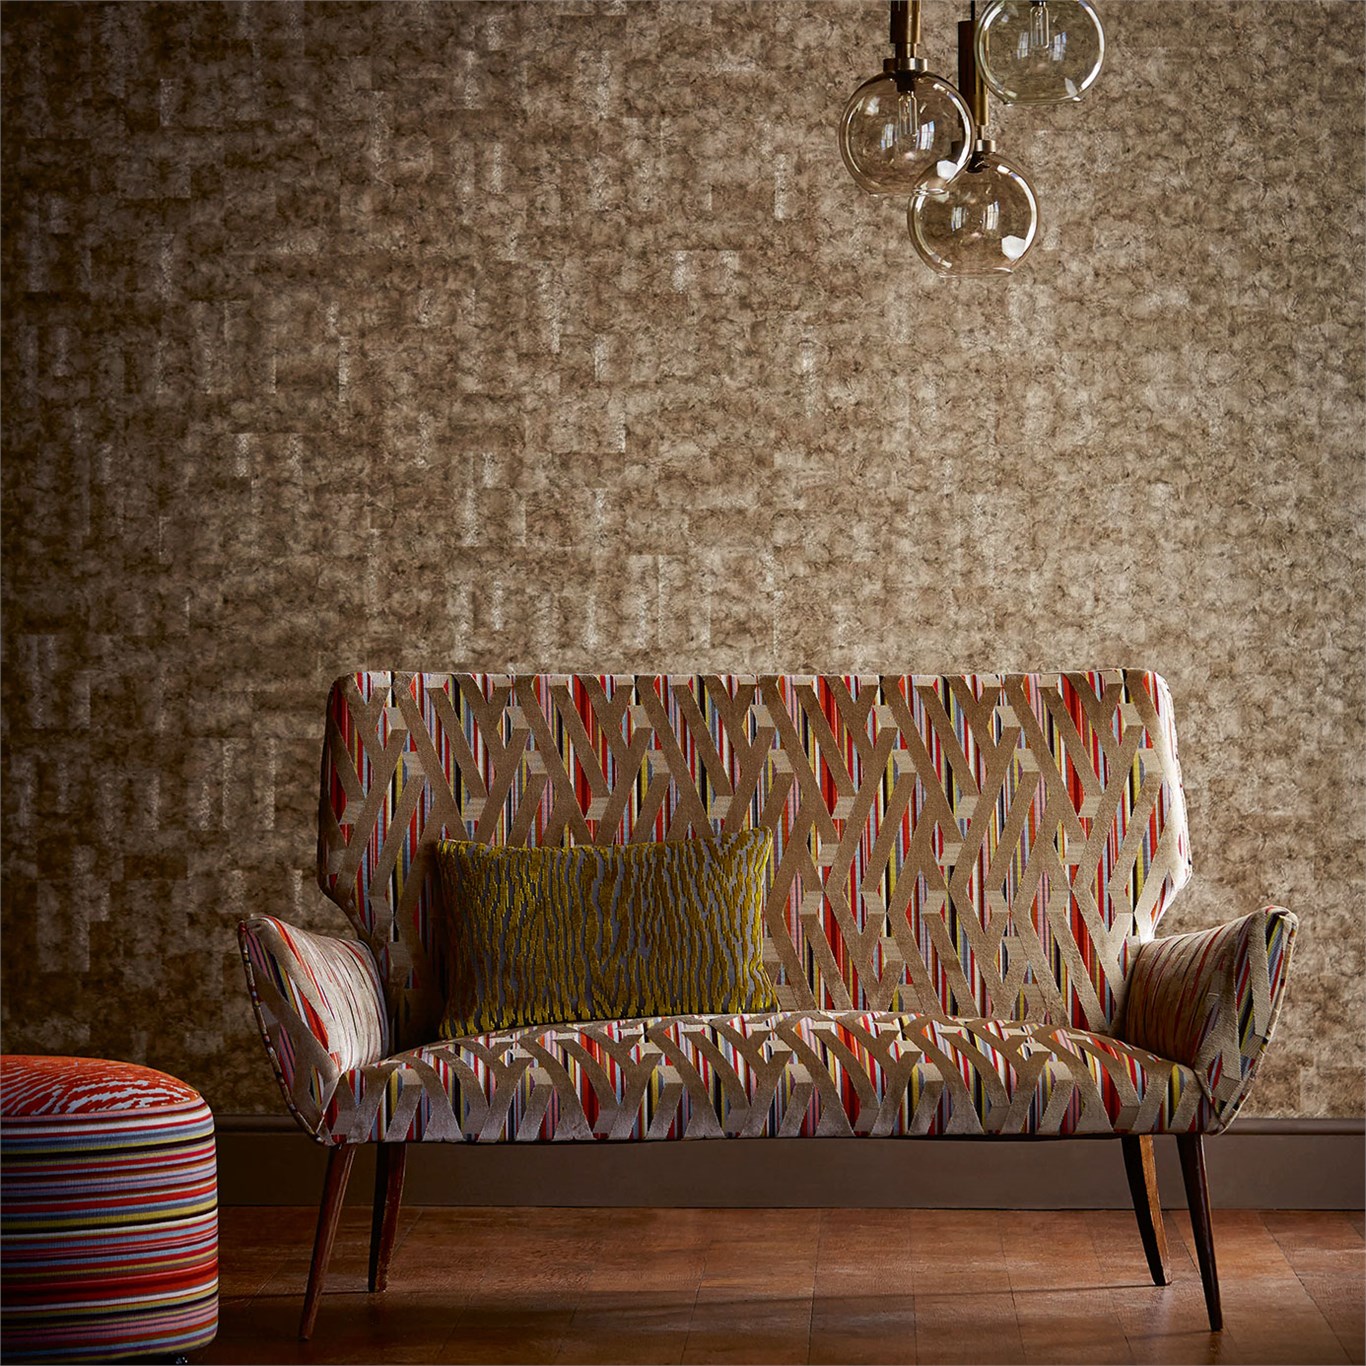 Products | Harlequin - Designer Fabrics and Wallpapers | Makena ...